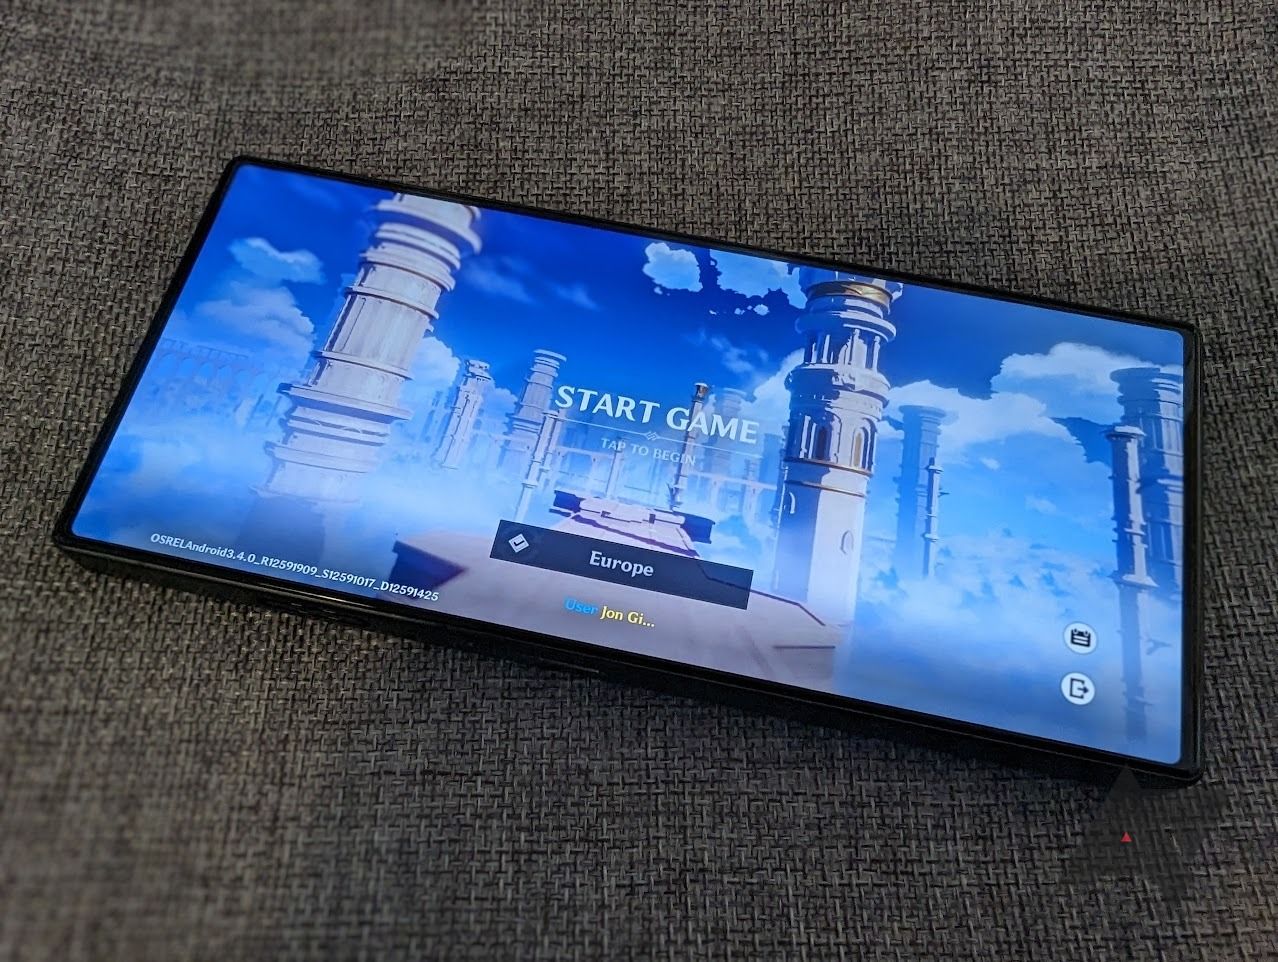 RedMagic 8 Pro Review: A Hot Android Gaming Value Phone - Page 2